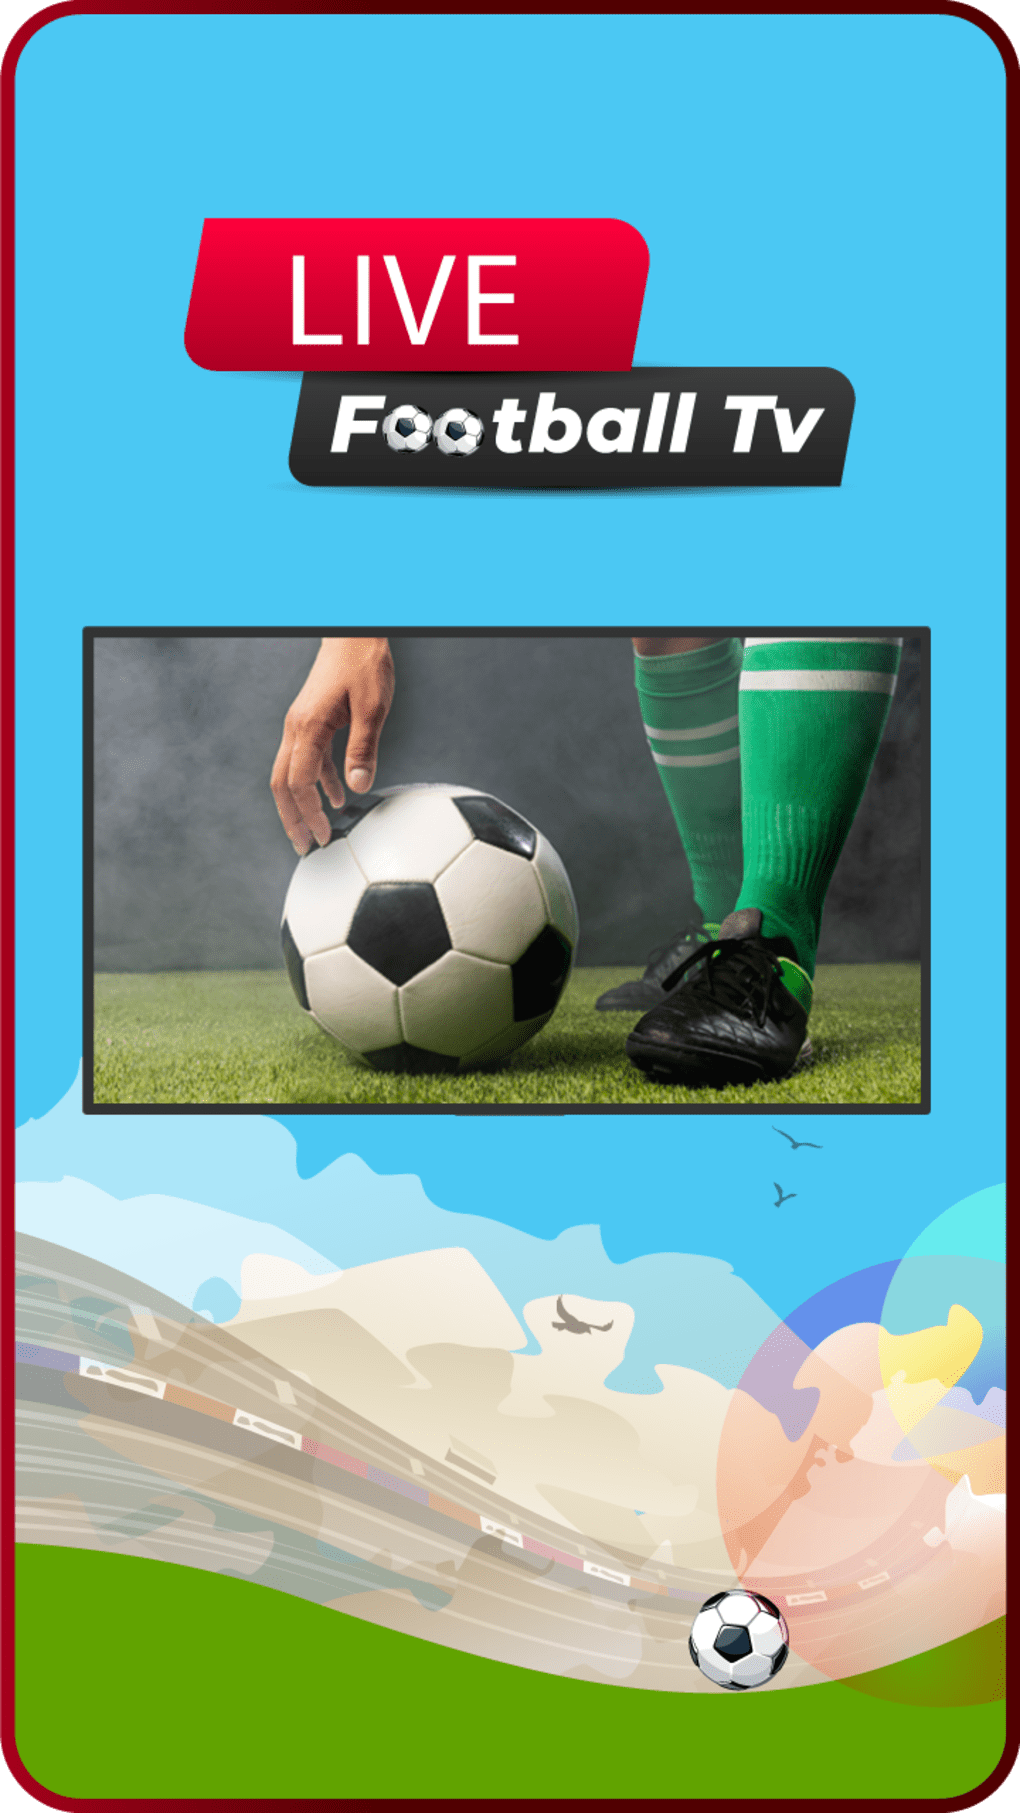 Live Football TV App for Android